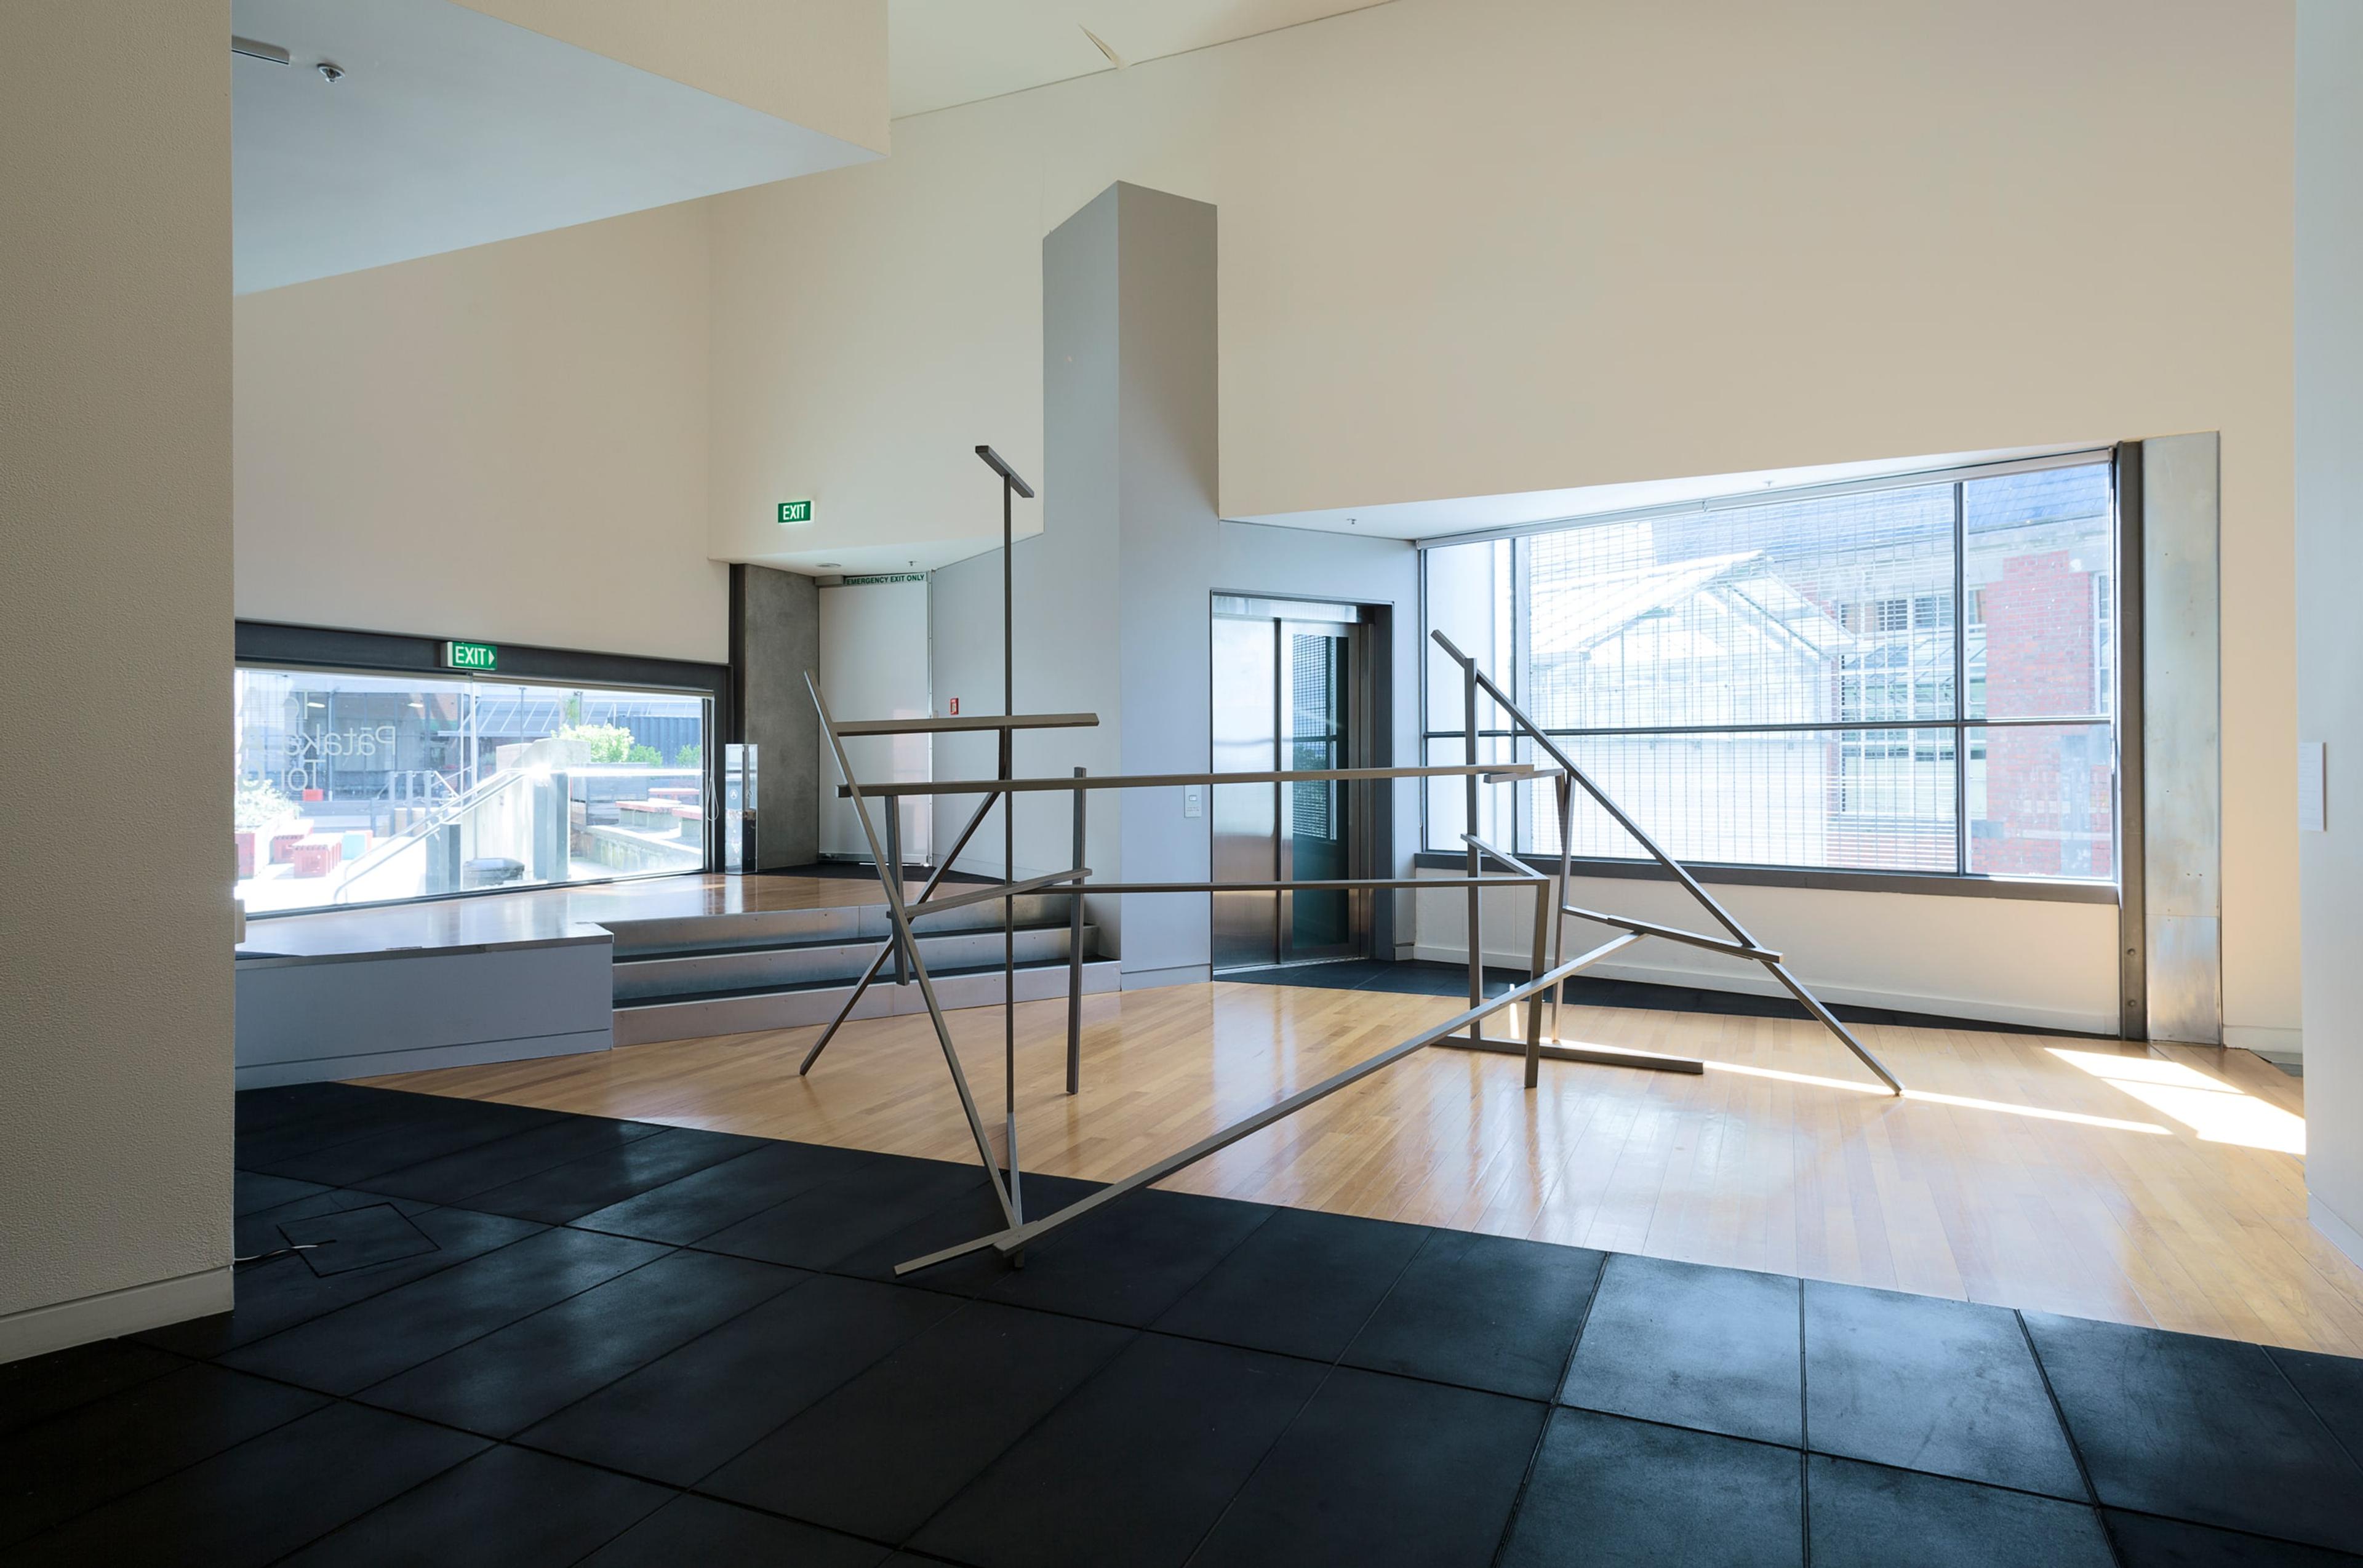 Installation view of John Panting: Spatial Constructions at the Adam Art Gallery, showing 5.07 (Untitled III), 1972–73, steel, 290 x 455 x 244cm. Collection of Auckland Art Gallery Toi o Tāmaki, purchased 1976. Photo: Shaun Waugh